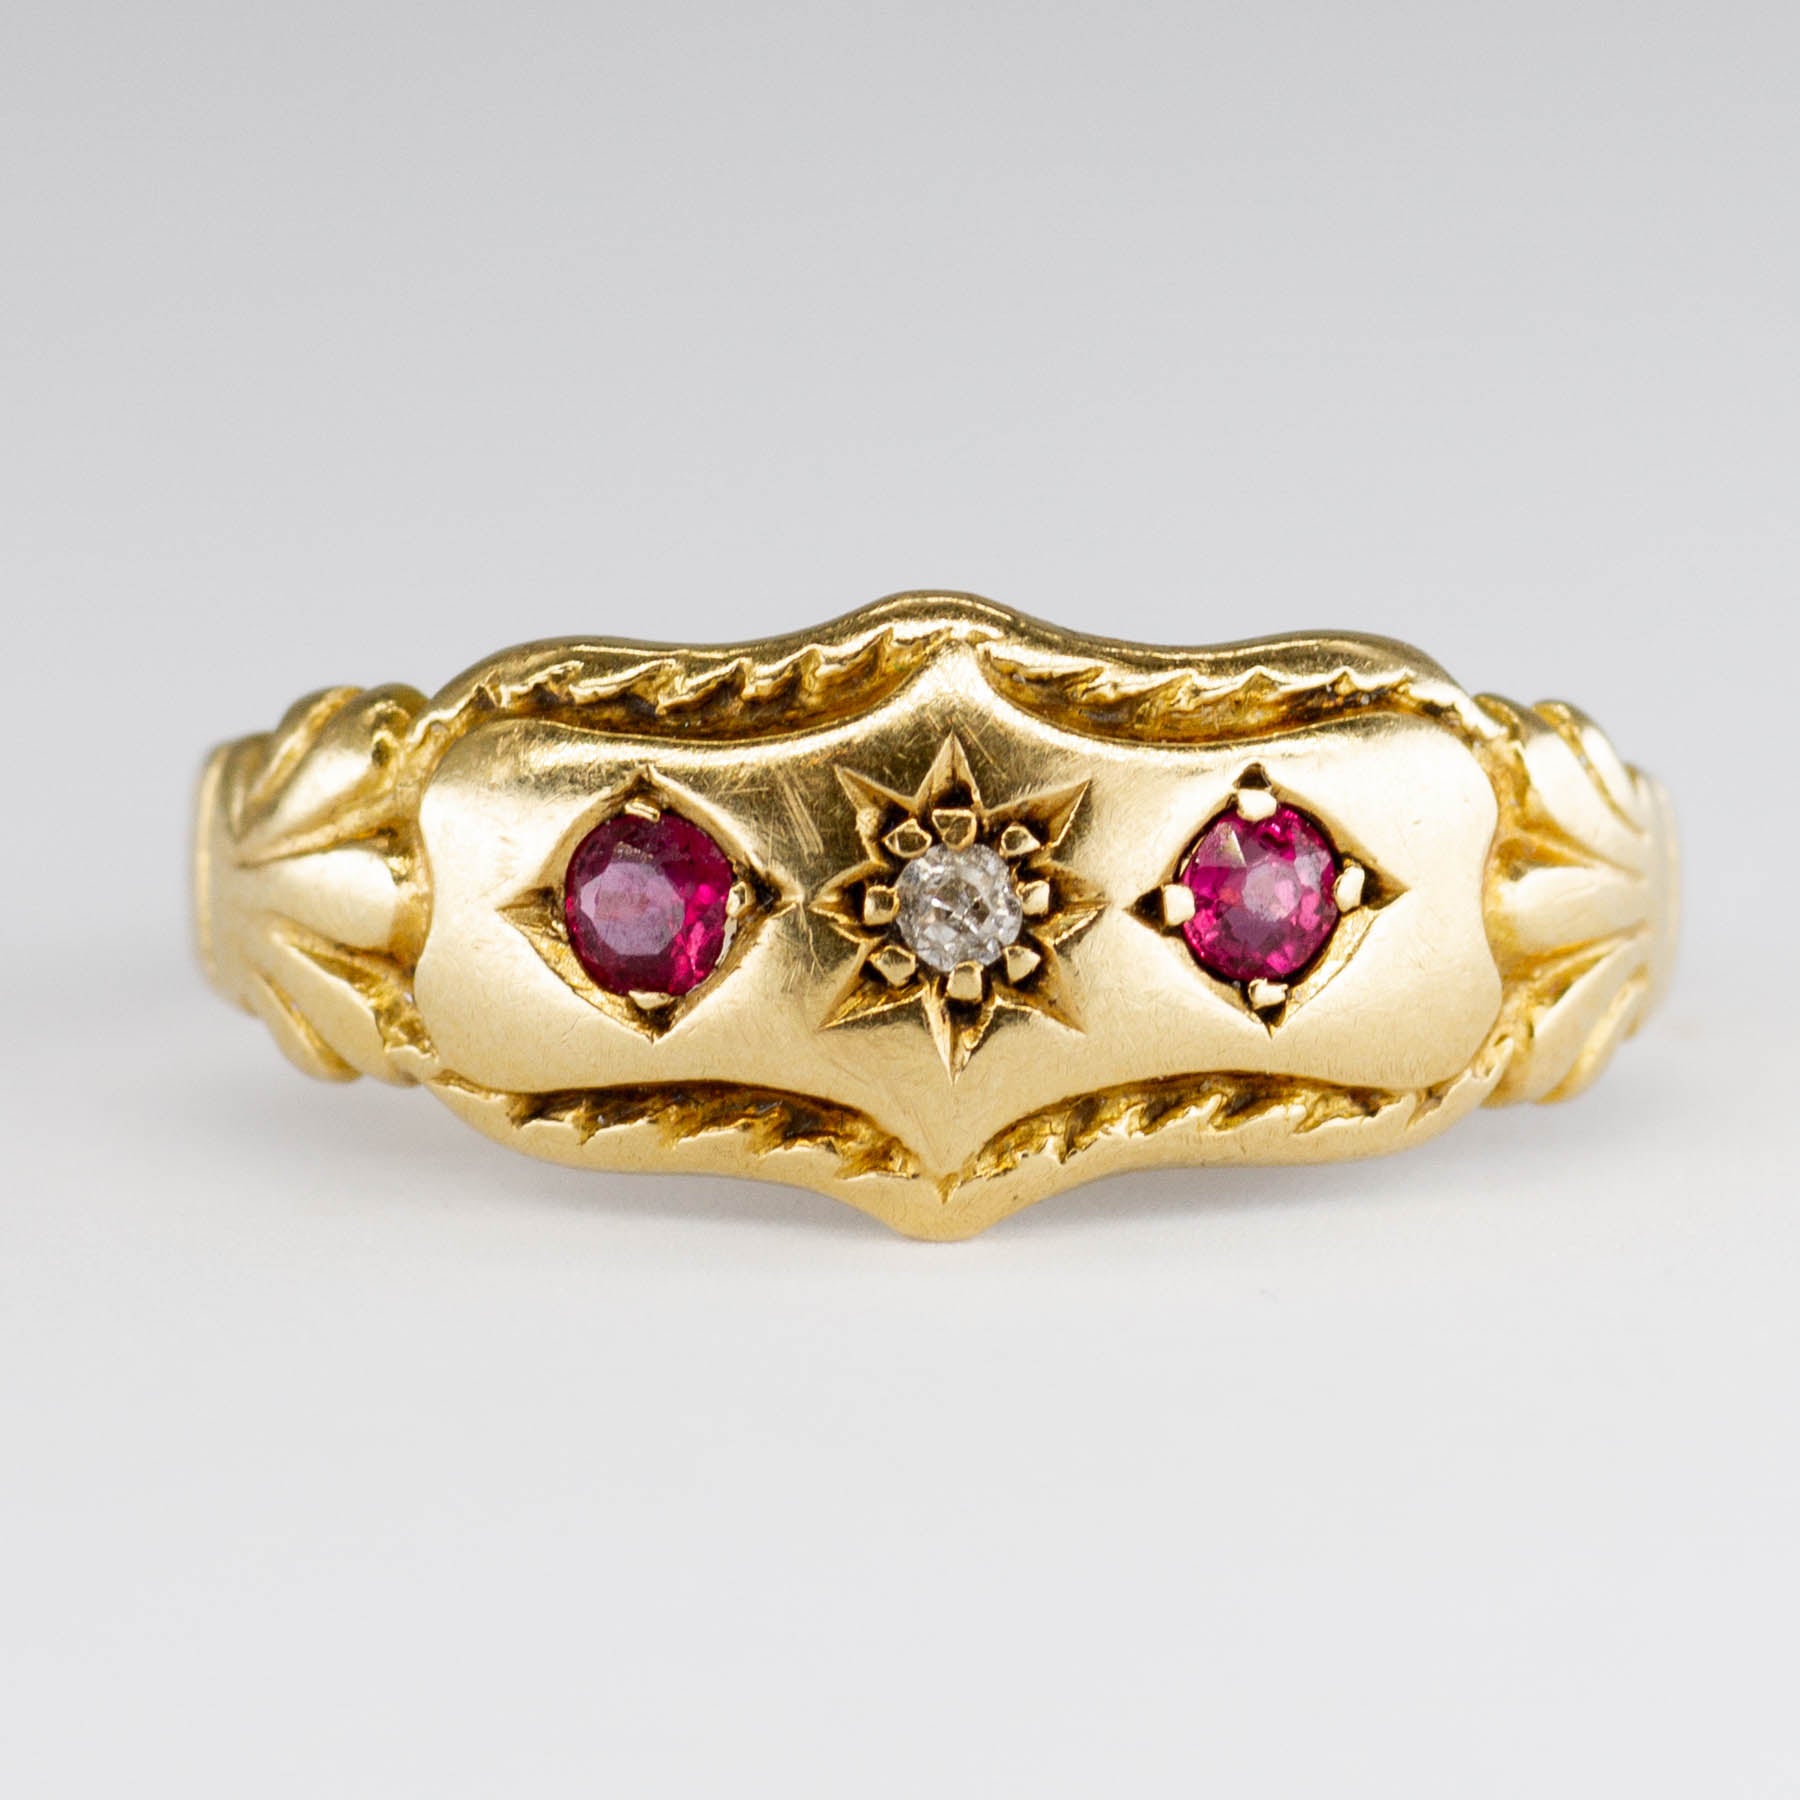 Edwardian 1905 18k Gold Diamond and Synthetic Ruby Ring | 0.15ctw | SZ 8